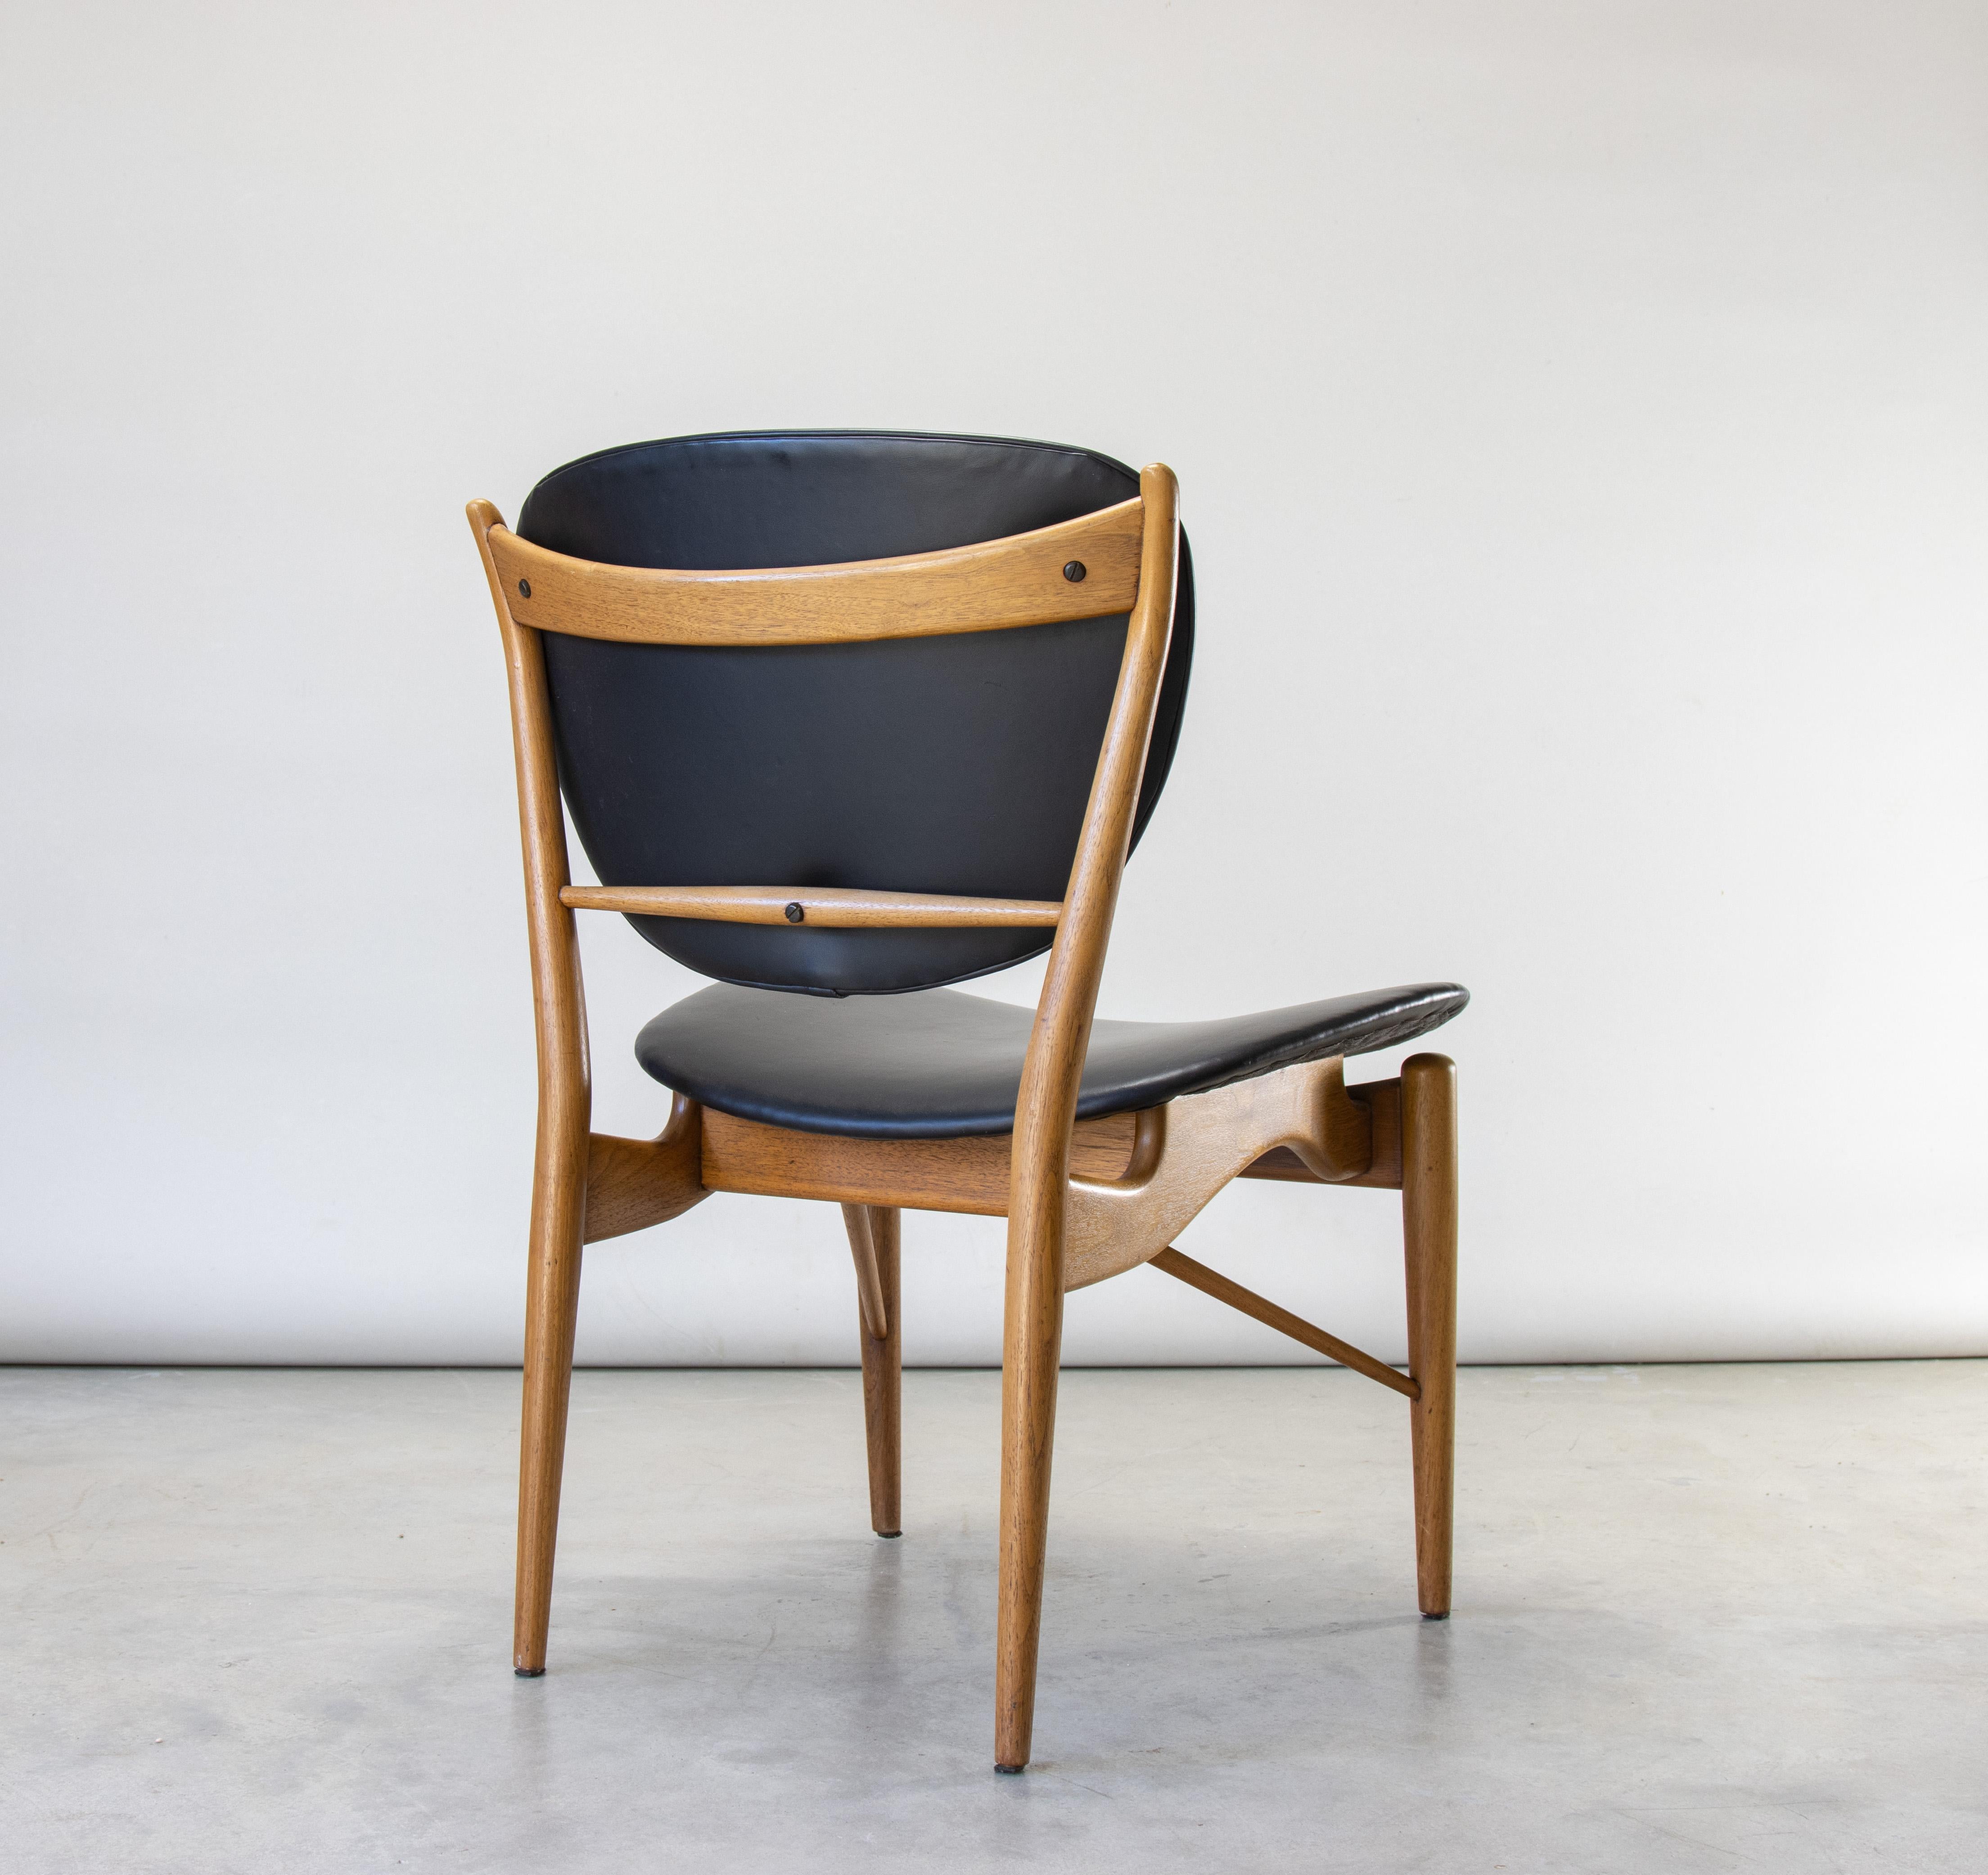 The Finn Juhl 51 chair, produced by Baker Furniture Company in the 1960s. A beautiful example with Finn Juhl’s signature details, including horned tips, exaggerated exposed hardware, angled stretcher,  guitar pick shaped back and floating seat. 